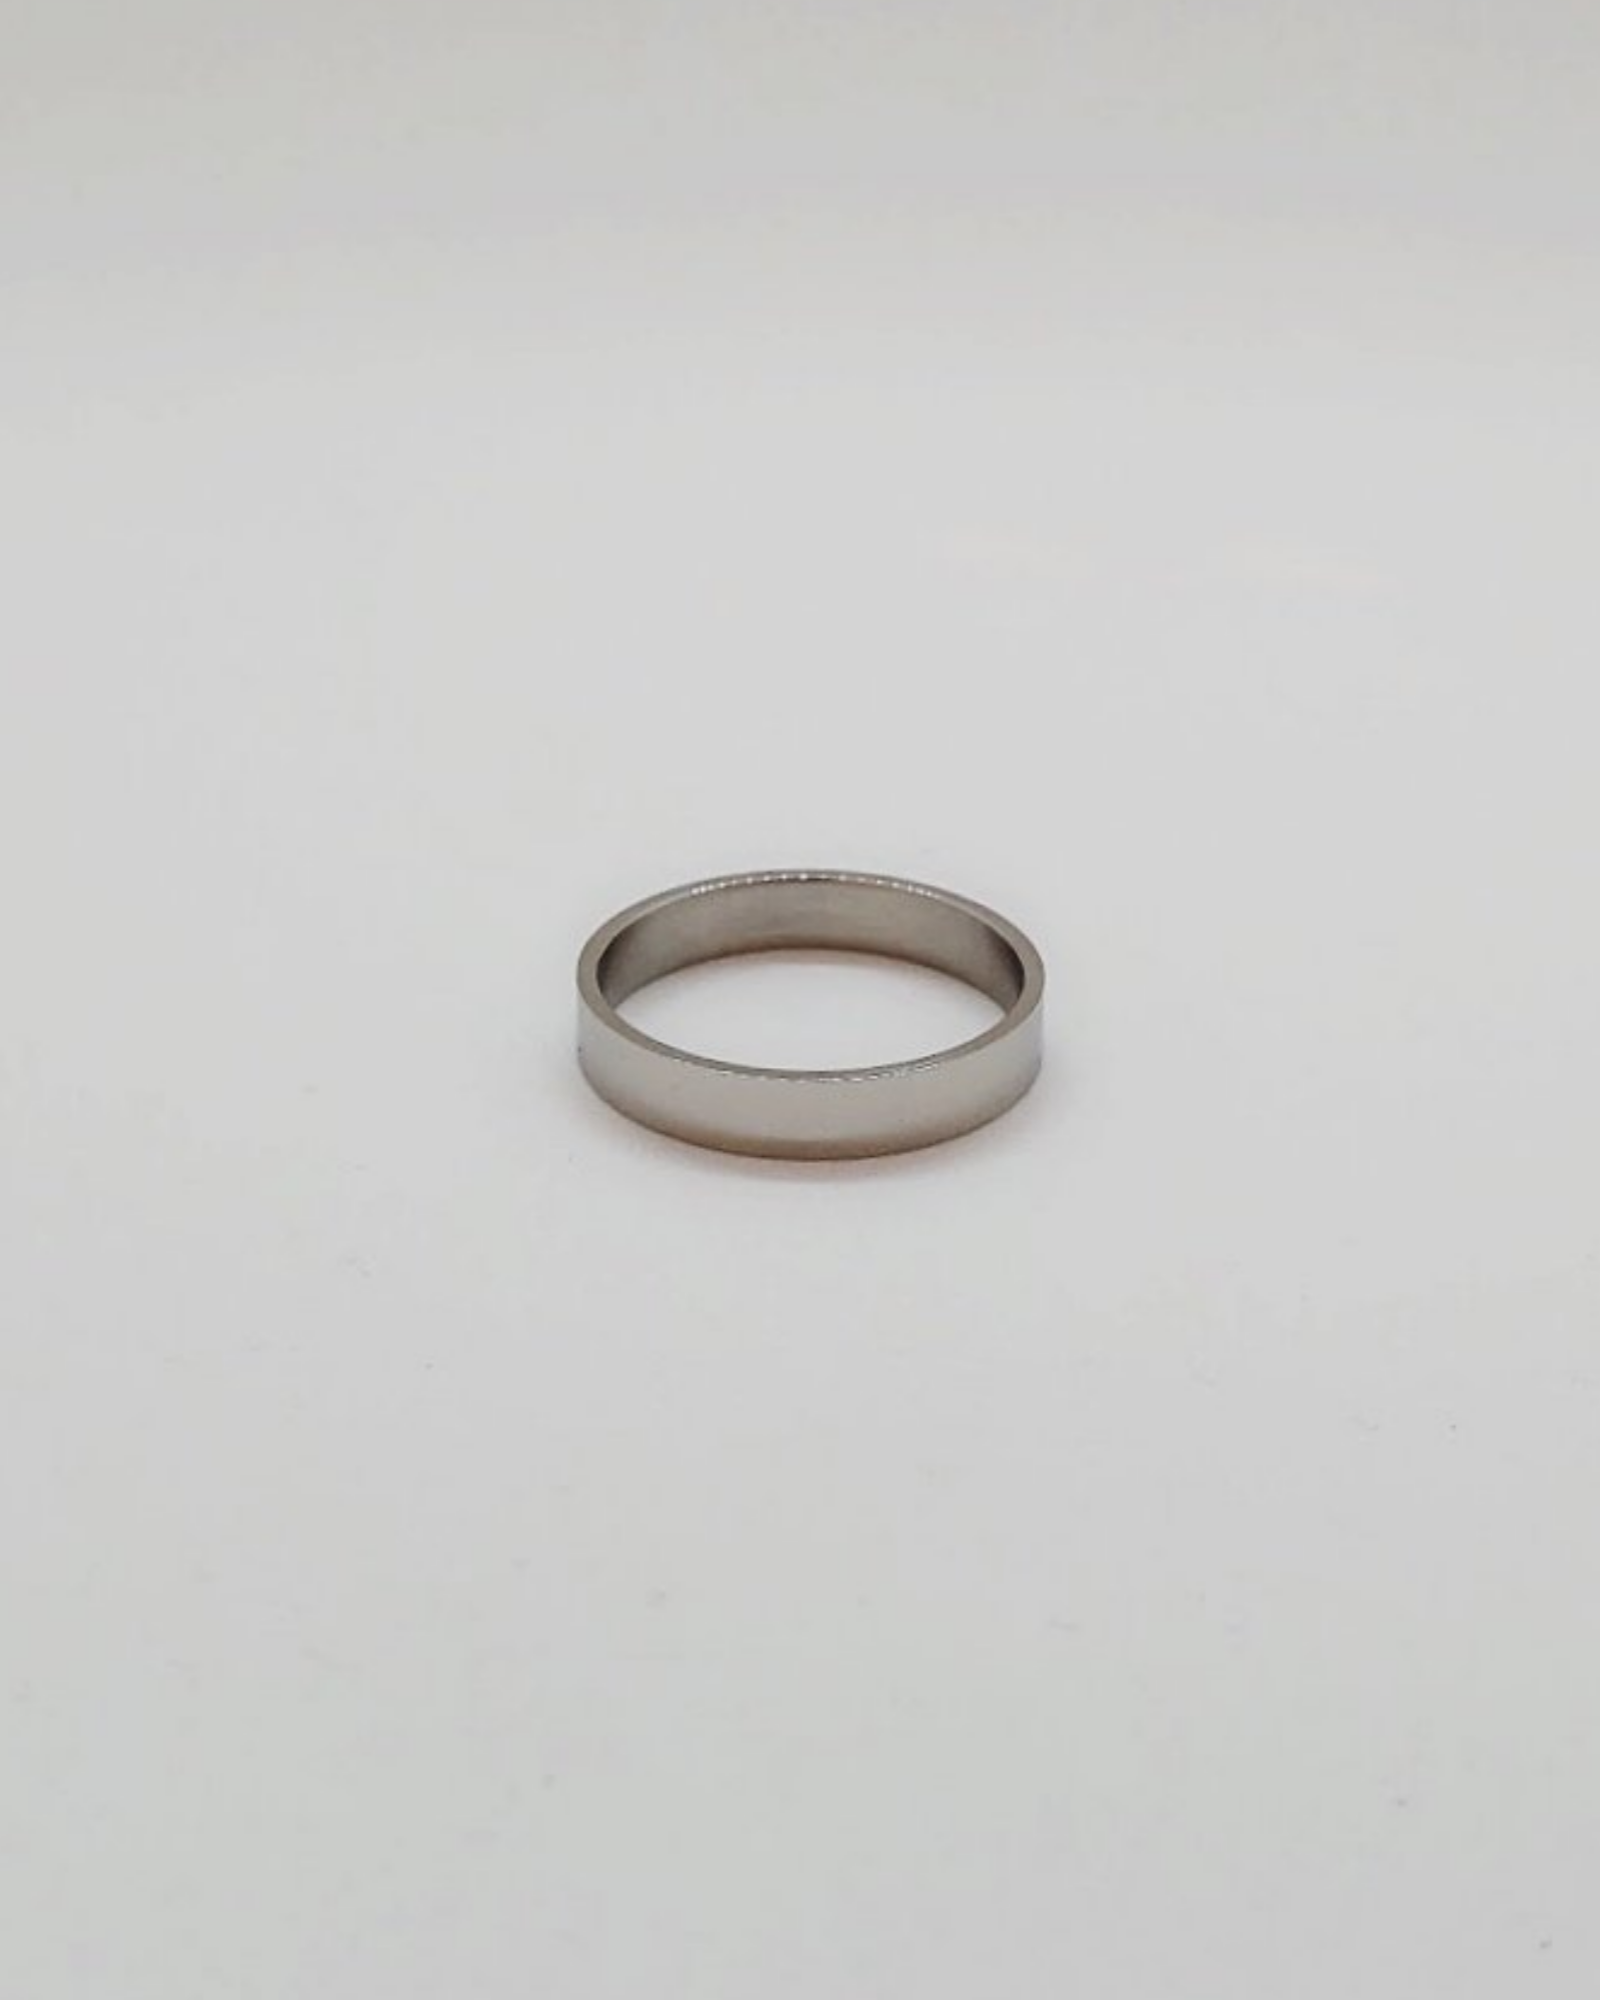 Stainless Steel Ring - 3mm